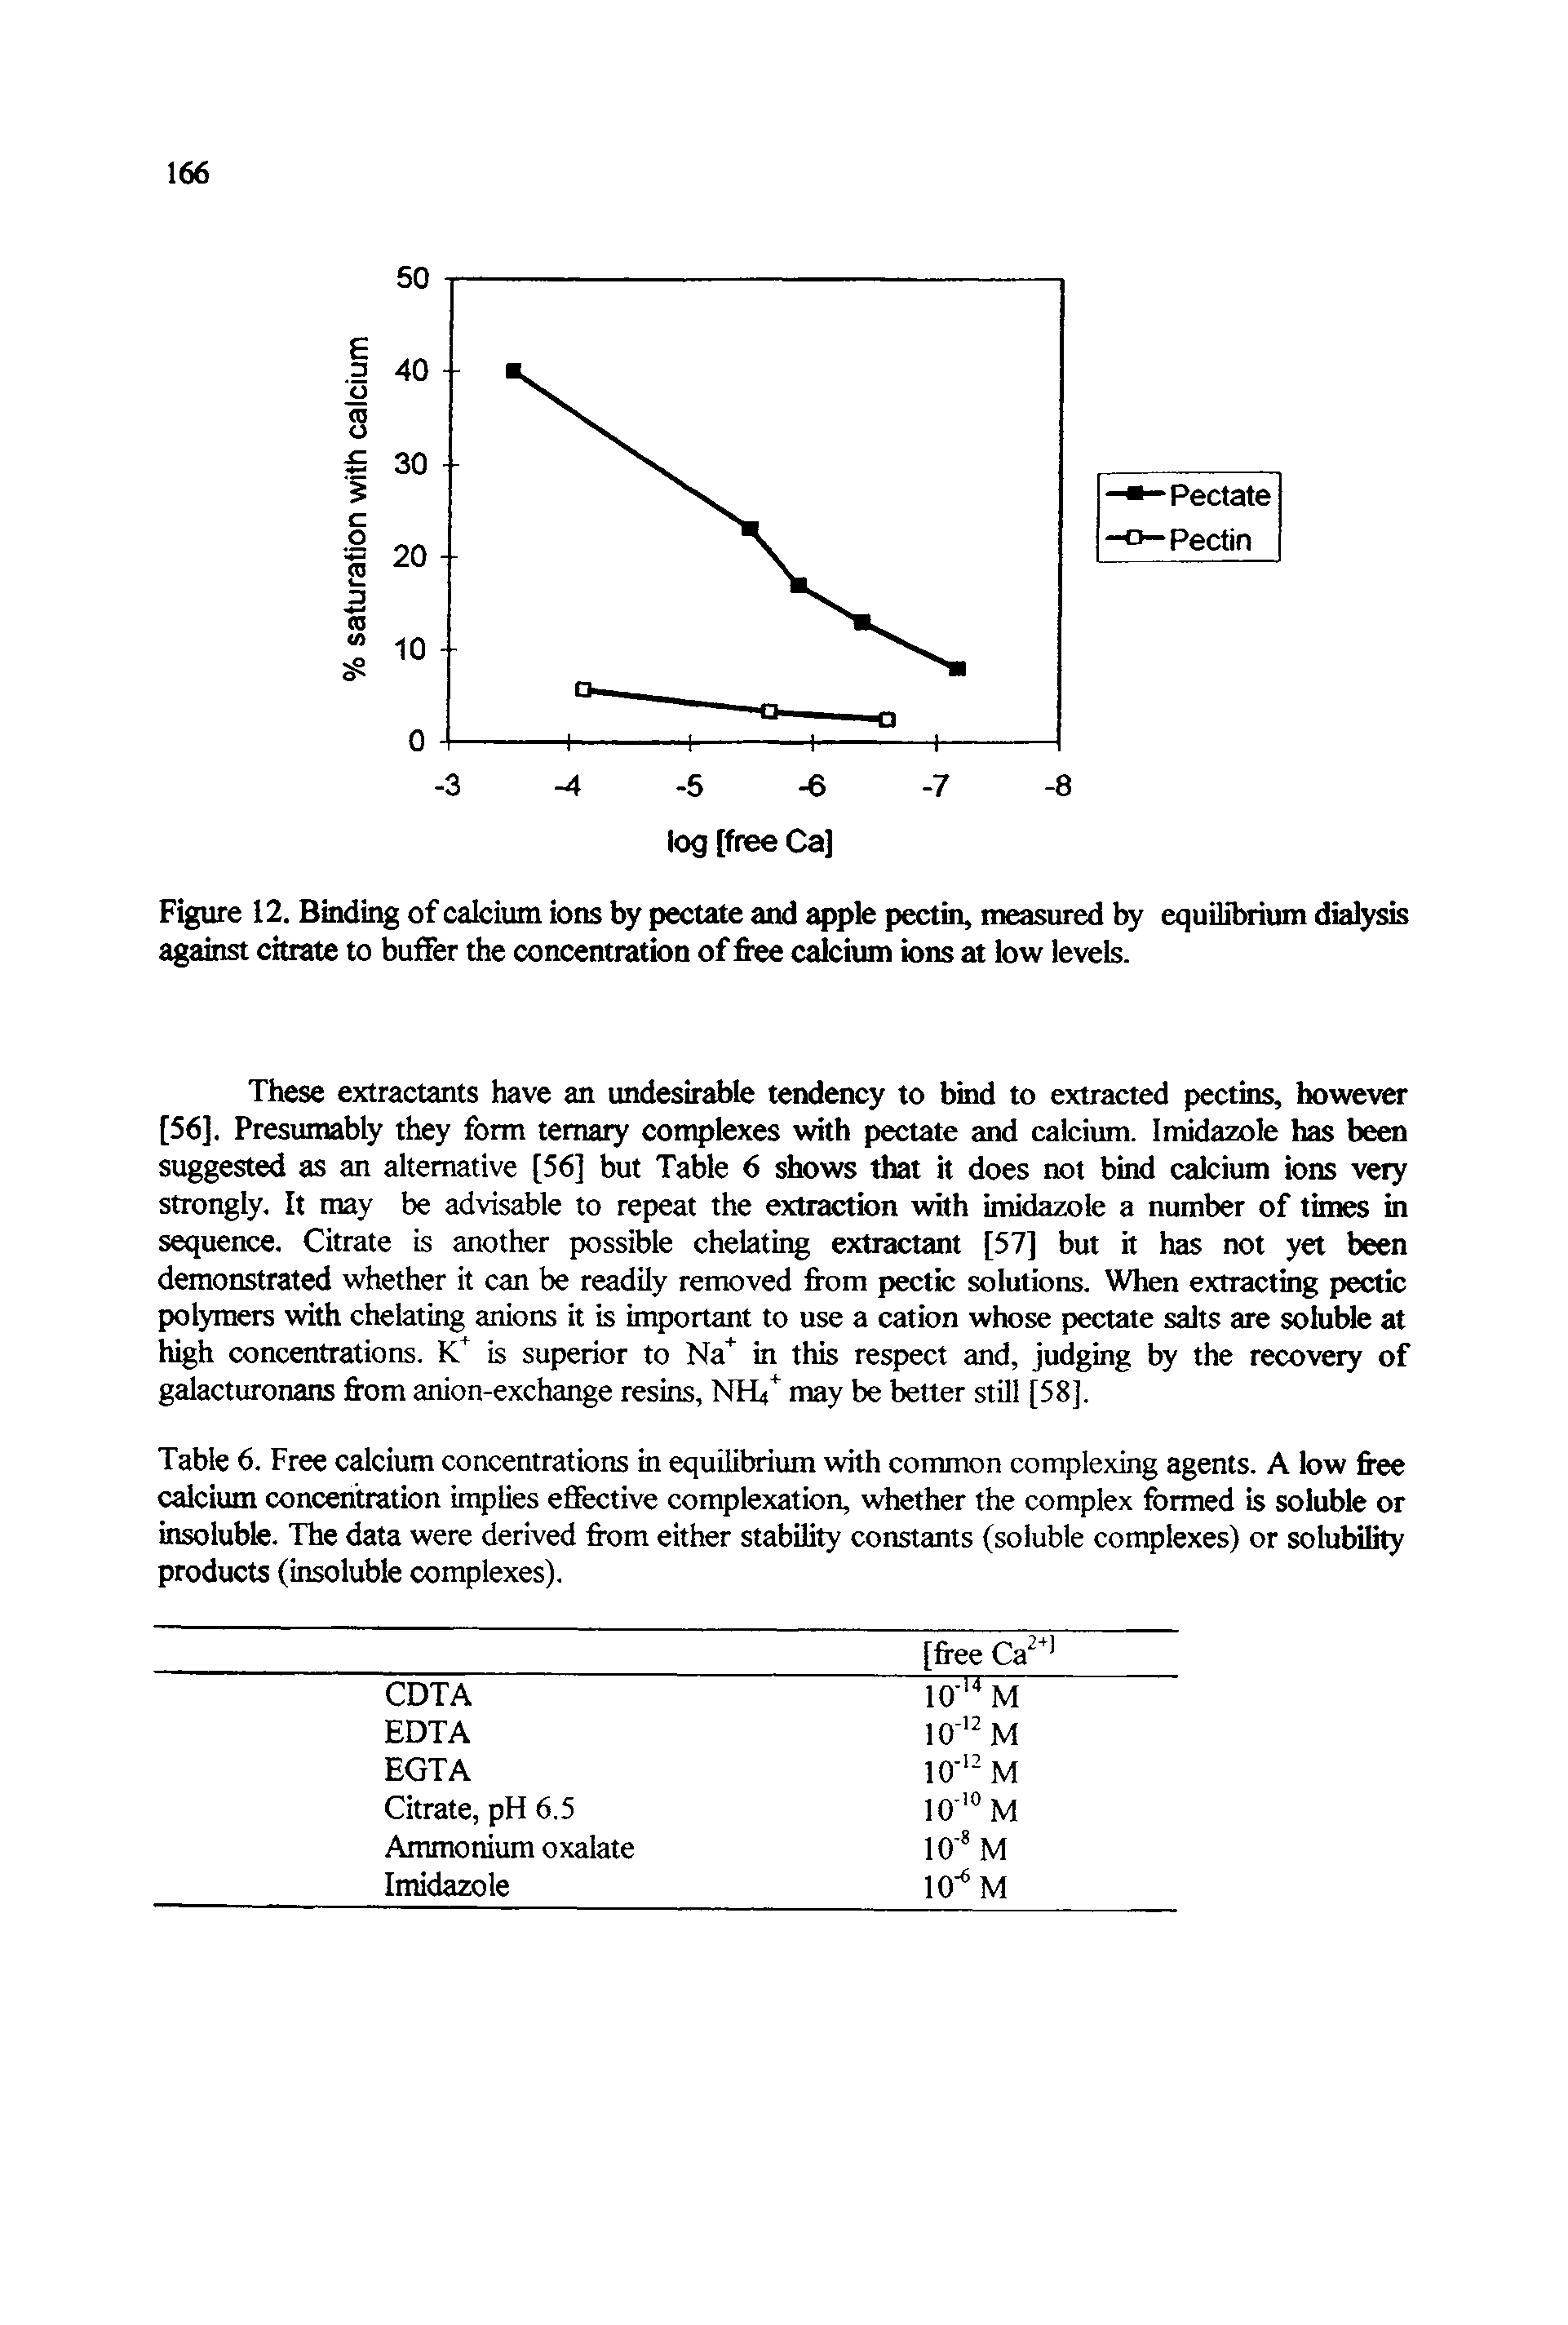 Table 6. Free calcium concentrations in equilibrium with common complexing agents. A low free calcium concentration implies effective complexation, whether the complex formed is soluble or insoluble. The data were derived from either stability constants (soluble complexes) or solubility products (insoluble complexes).